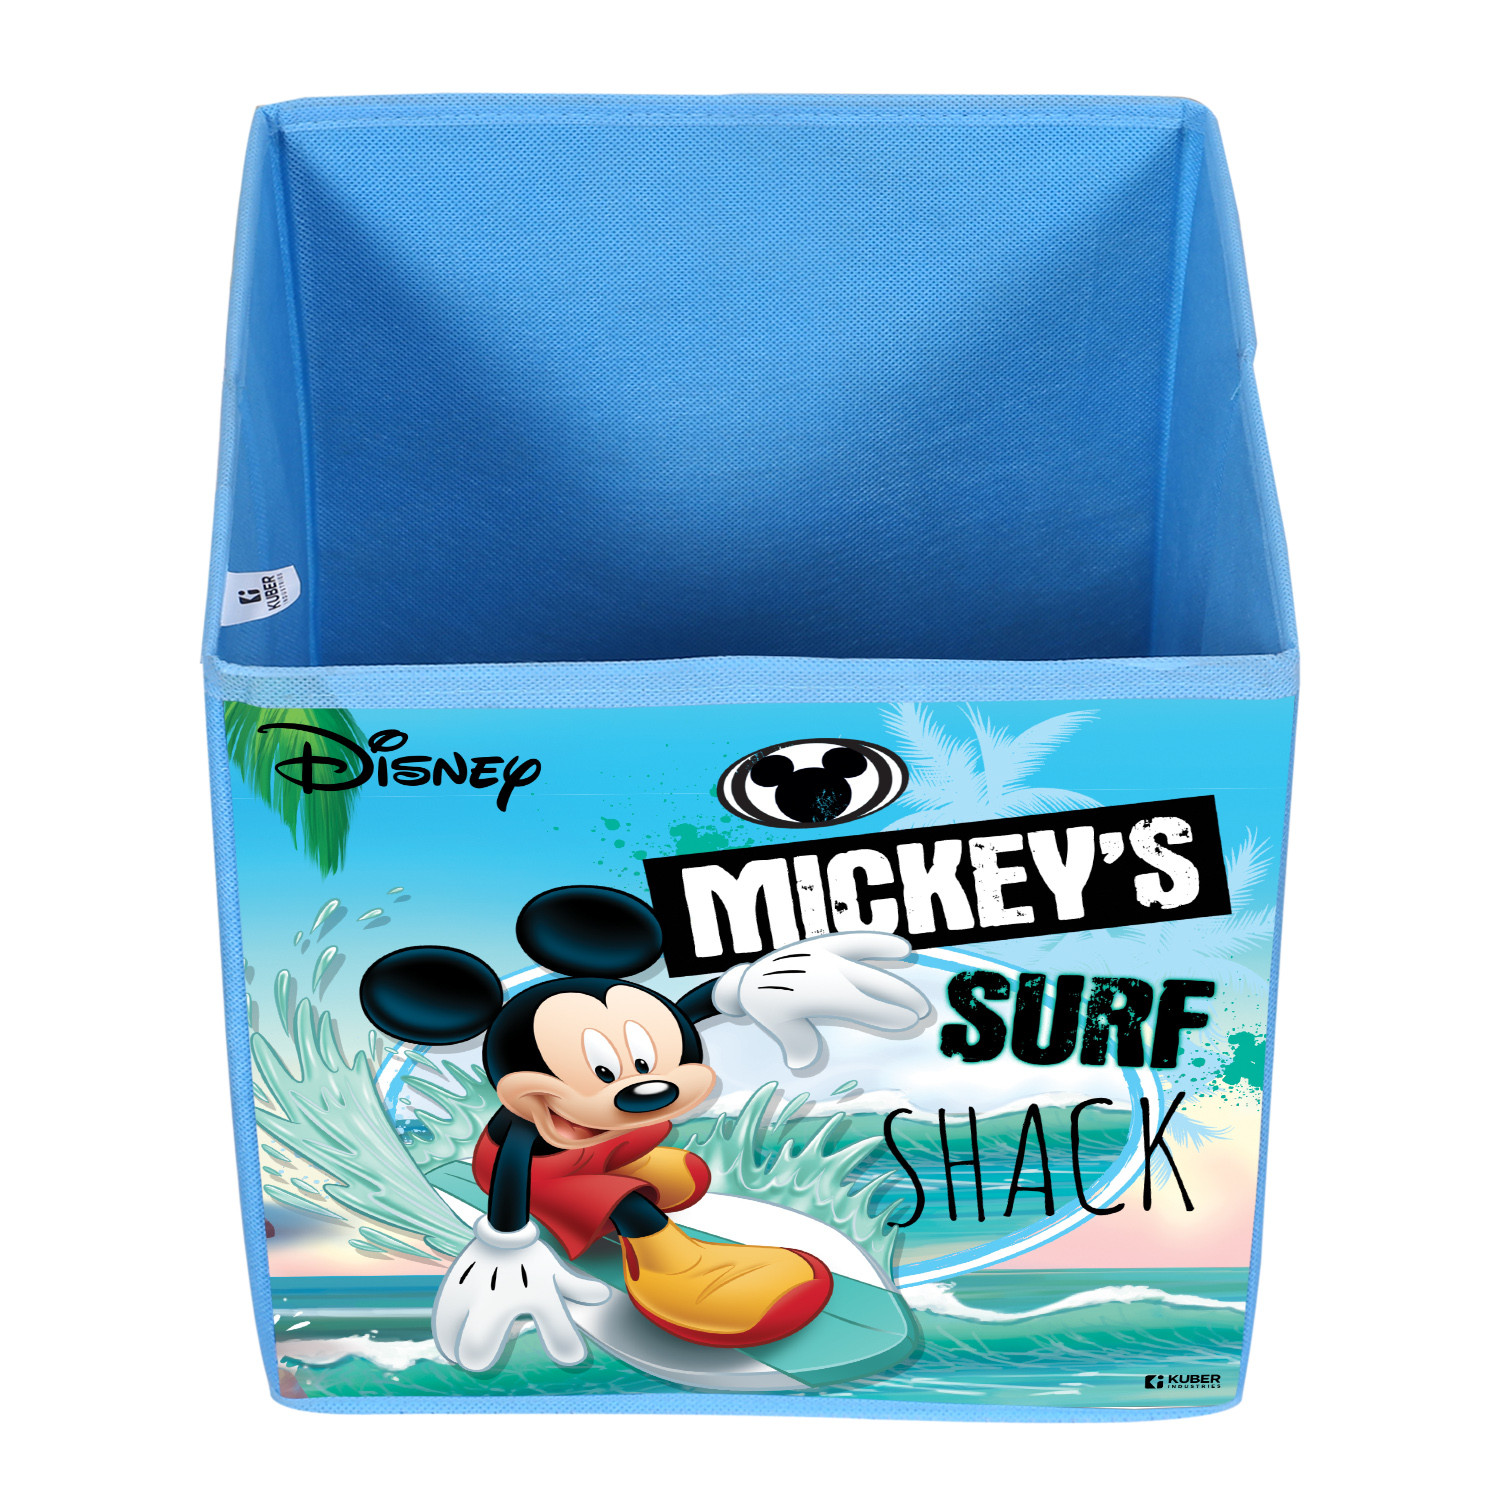 Kuber Industries Disney Mickey Surf Print Durable & Collapsible Square Storage Box|Clothes Organizer With Handle,.(Sky Blue)